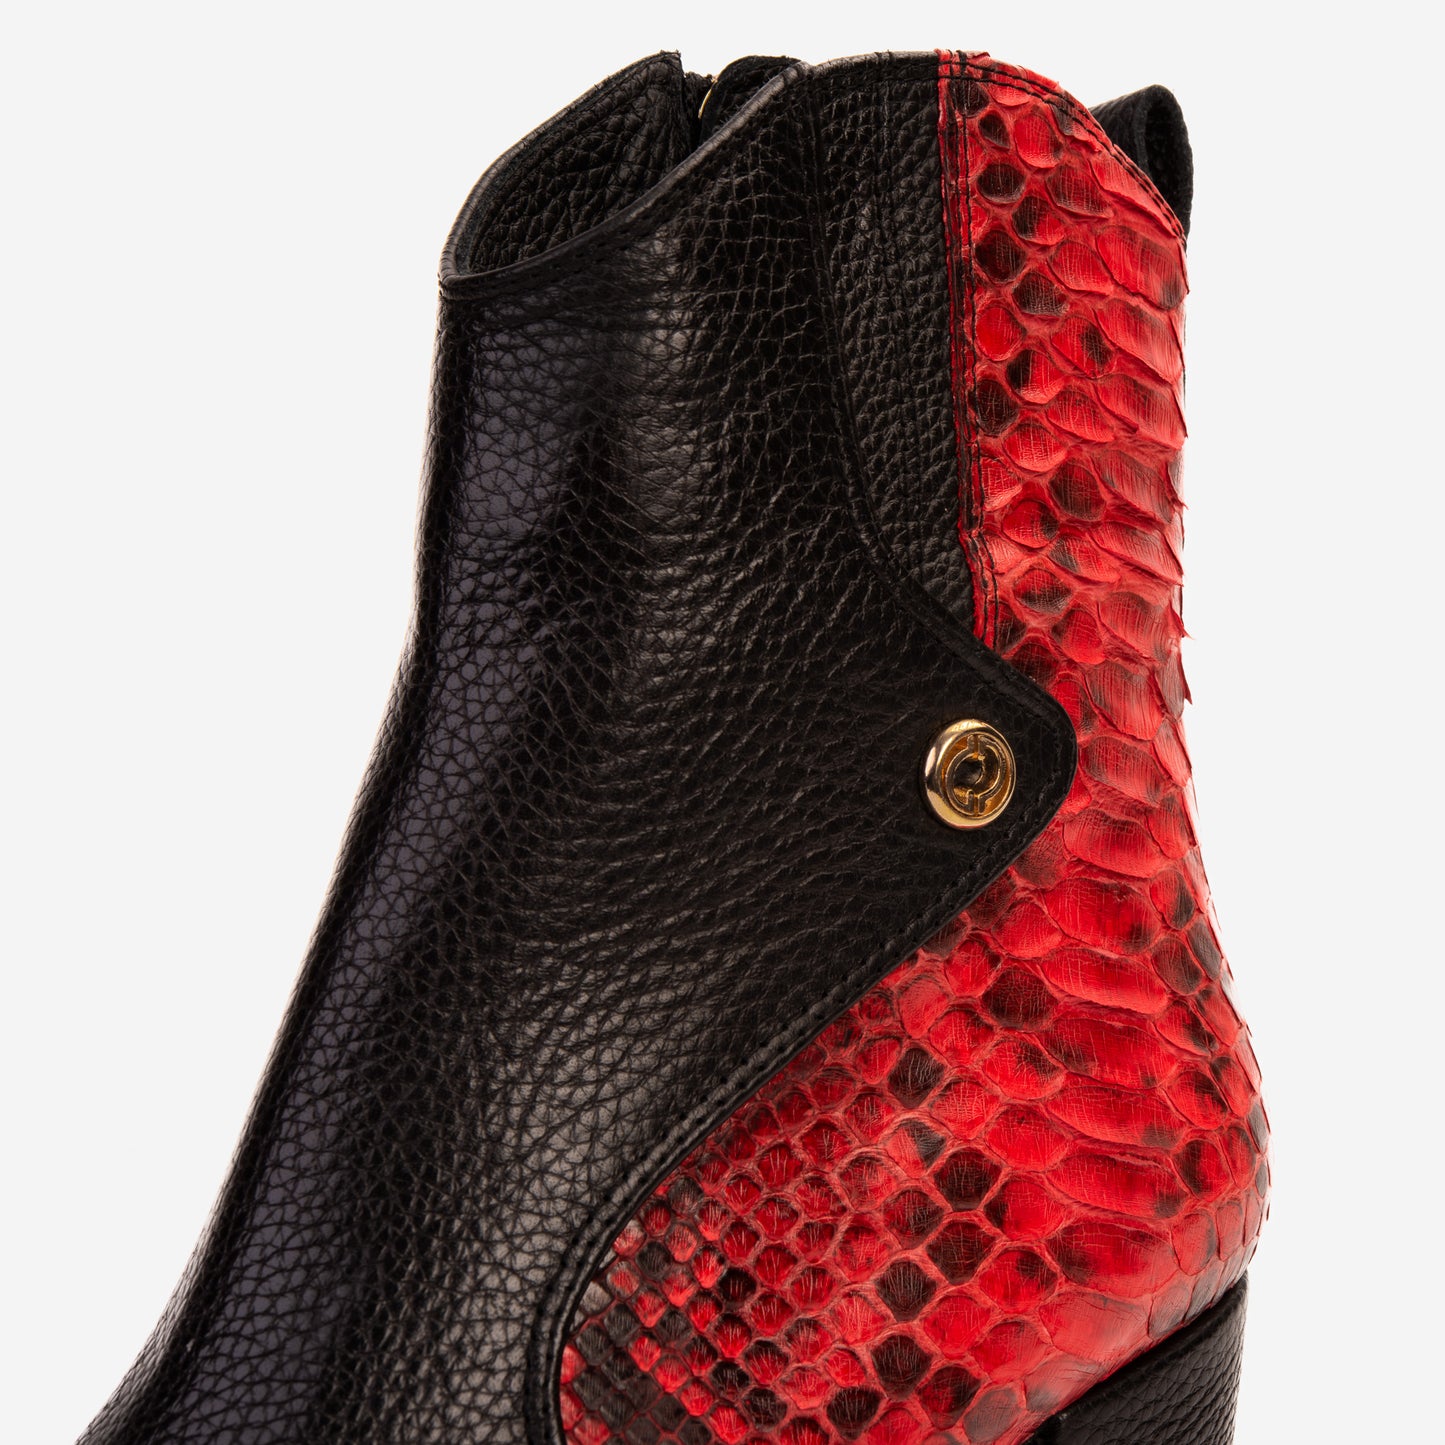 The Saturn Red Pythn Leather Block Heel Women Boot